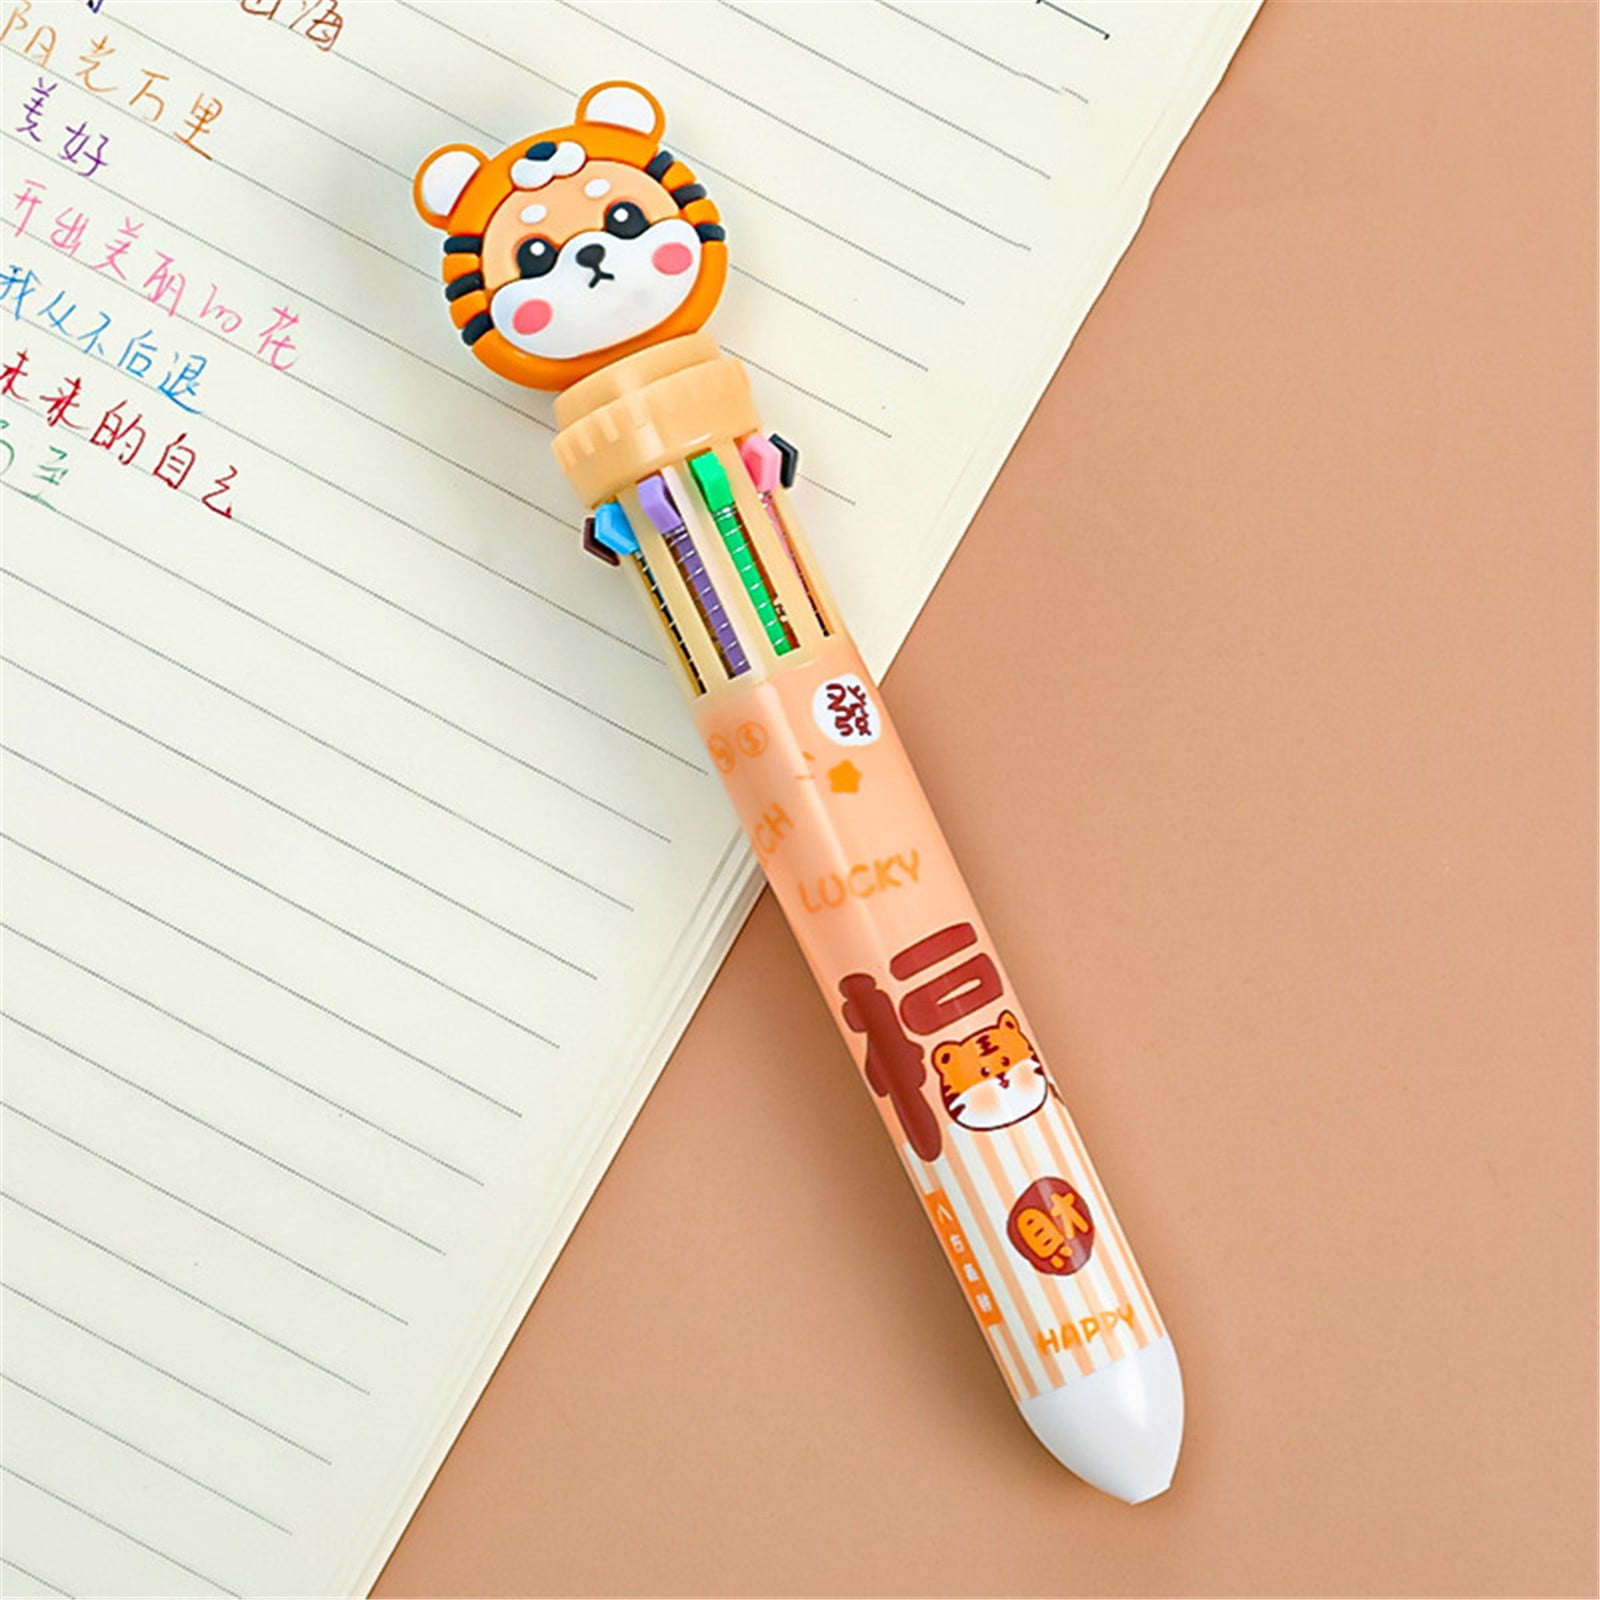 Banghong 0 Color Ballpoint Pen,Multi Colored Pens In One,Cartoon New Tiger  Multicolor Ballpoint Pen,Push Type Color Multifunction Marker For Work